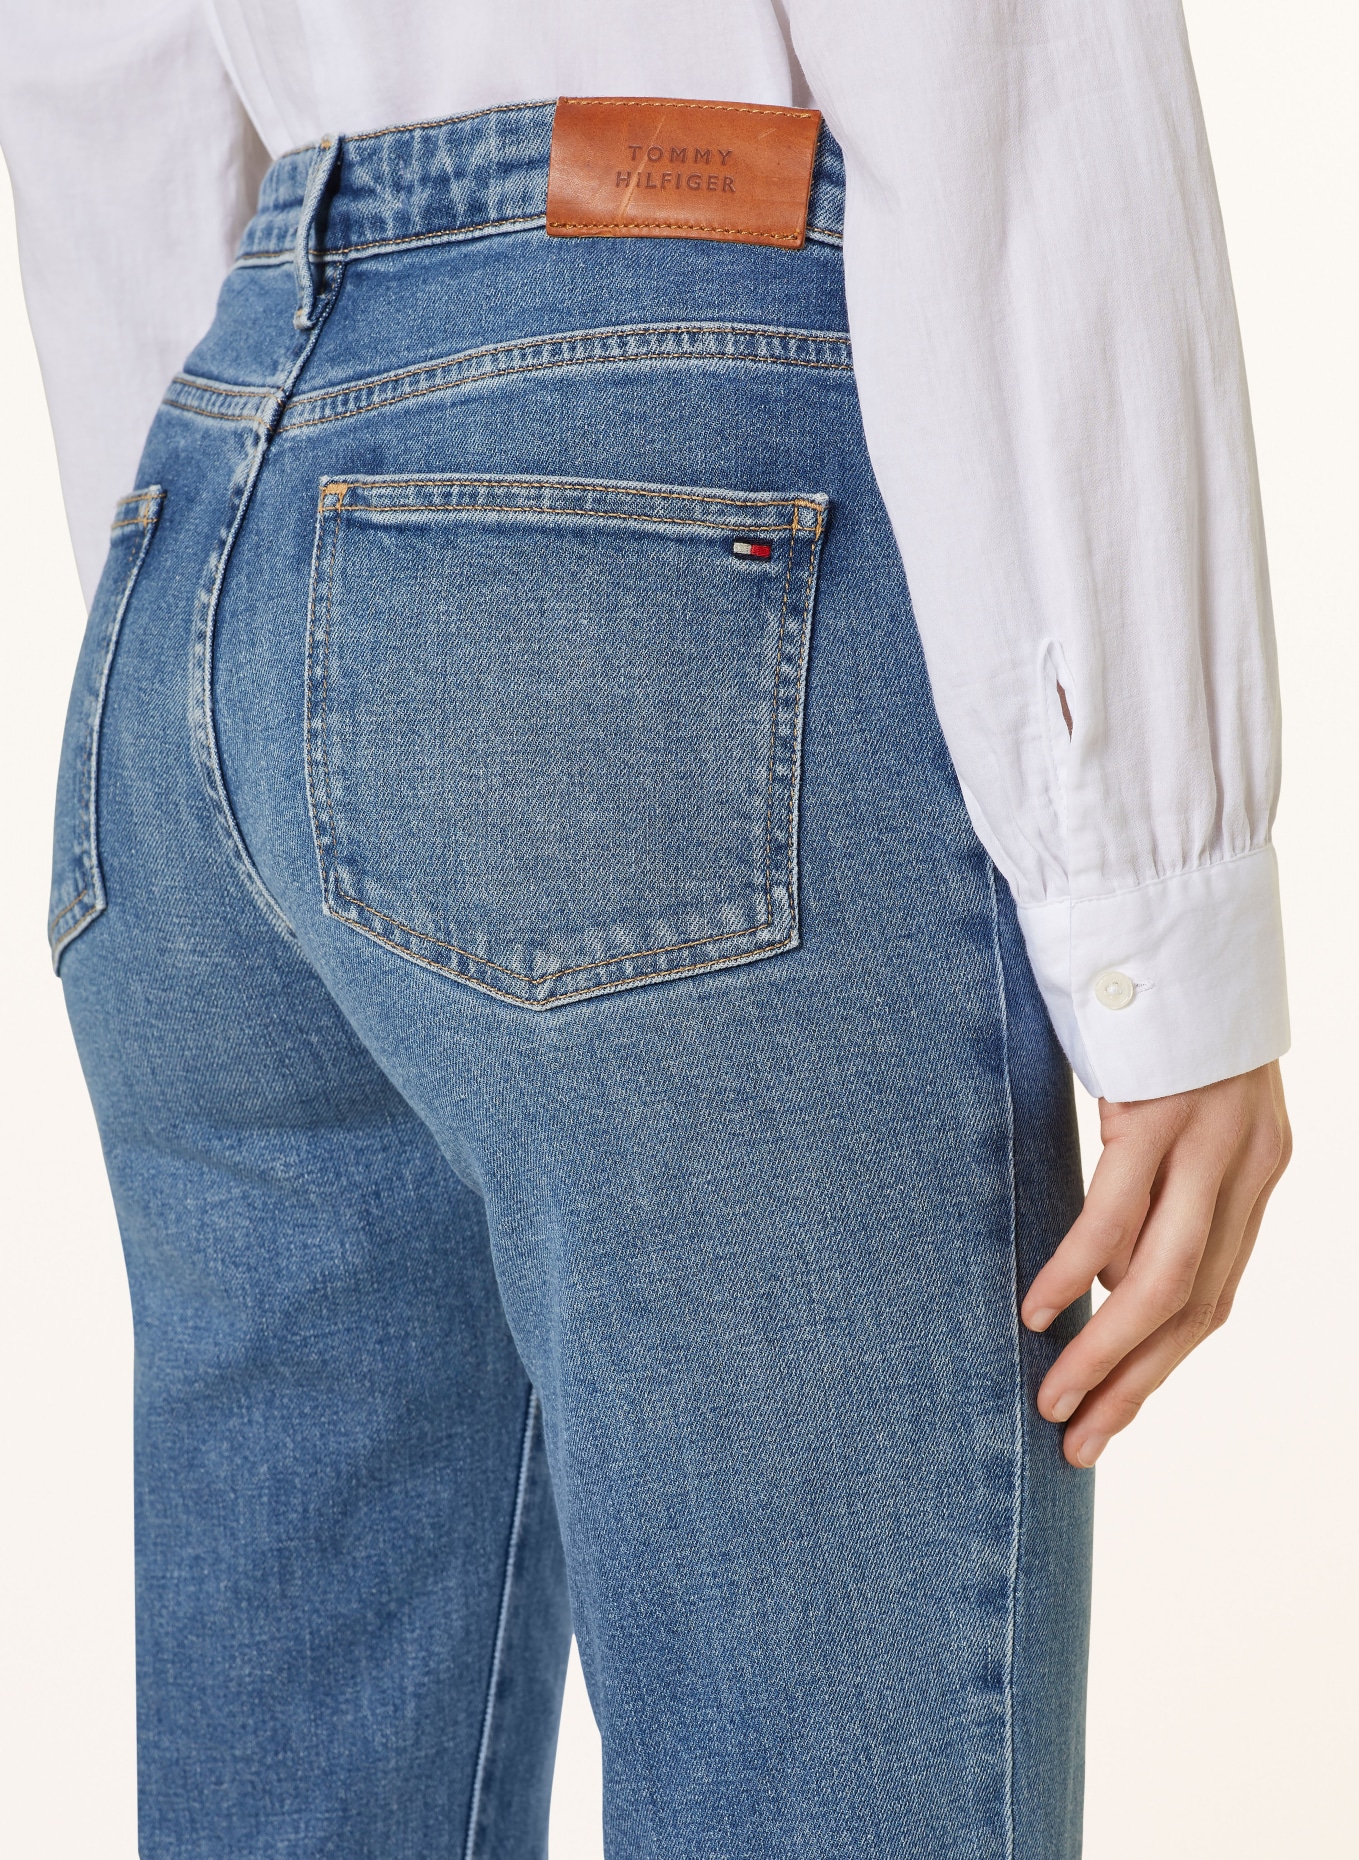 TOMMY HILFIGER Bootcut Jeans in 1a8 mel | Stretchjeans